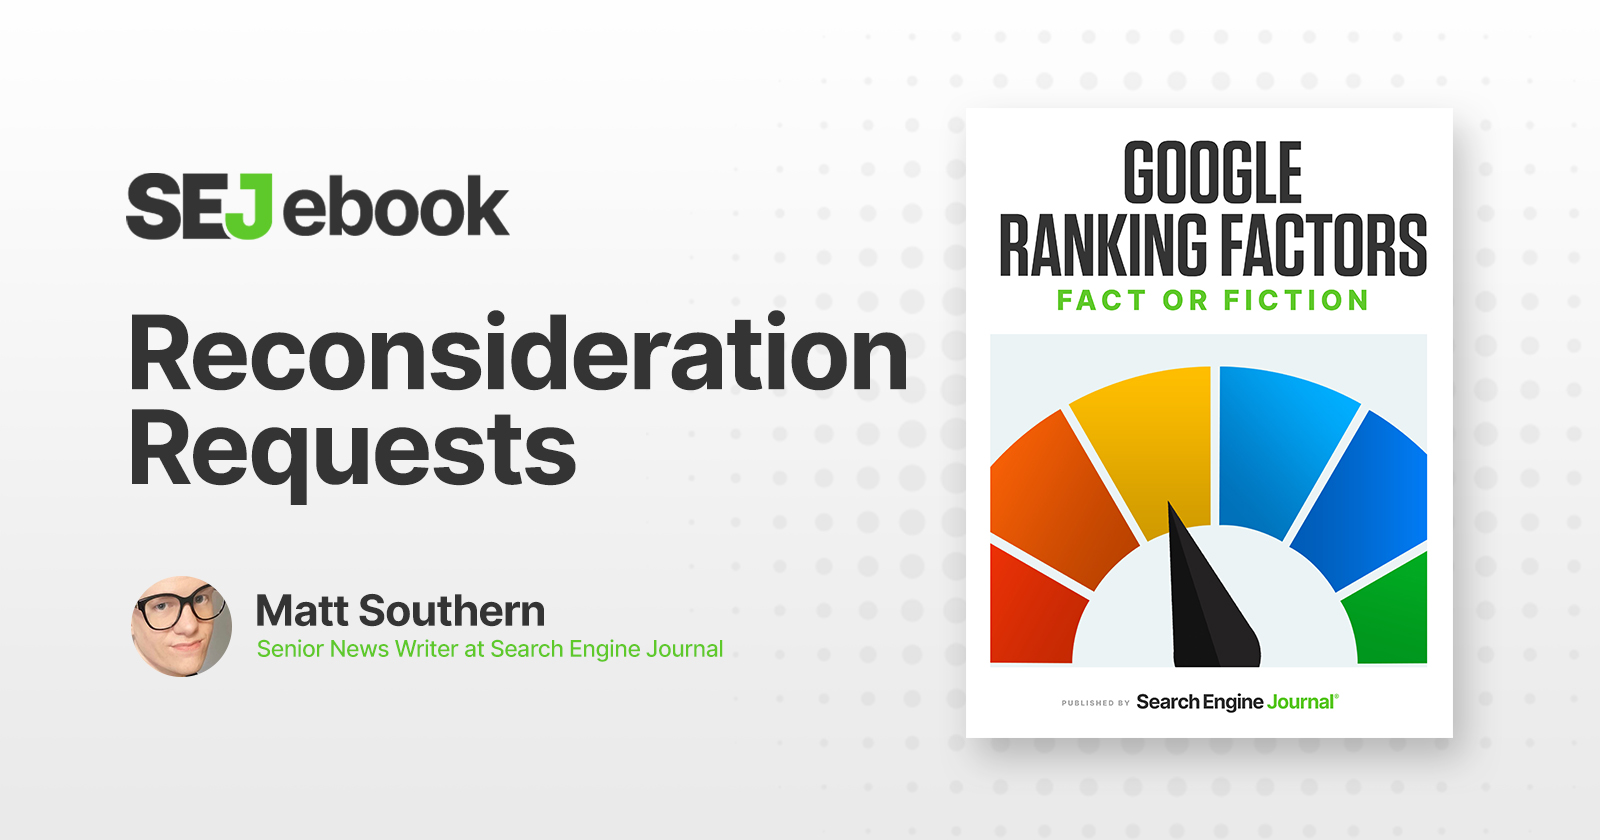 Are Reconsideration Requests A Google Ranking Factor? via @sejournal, @MattGSouthern